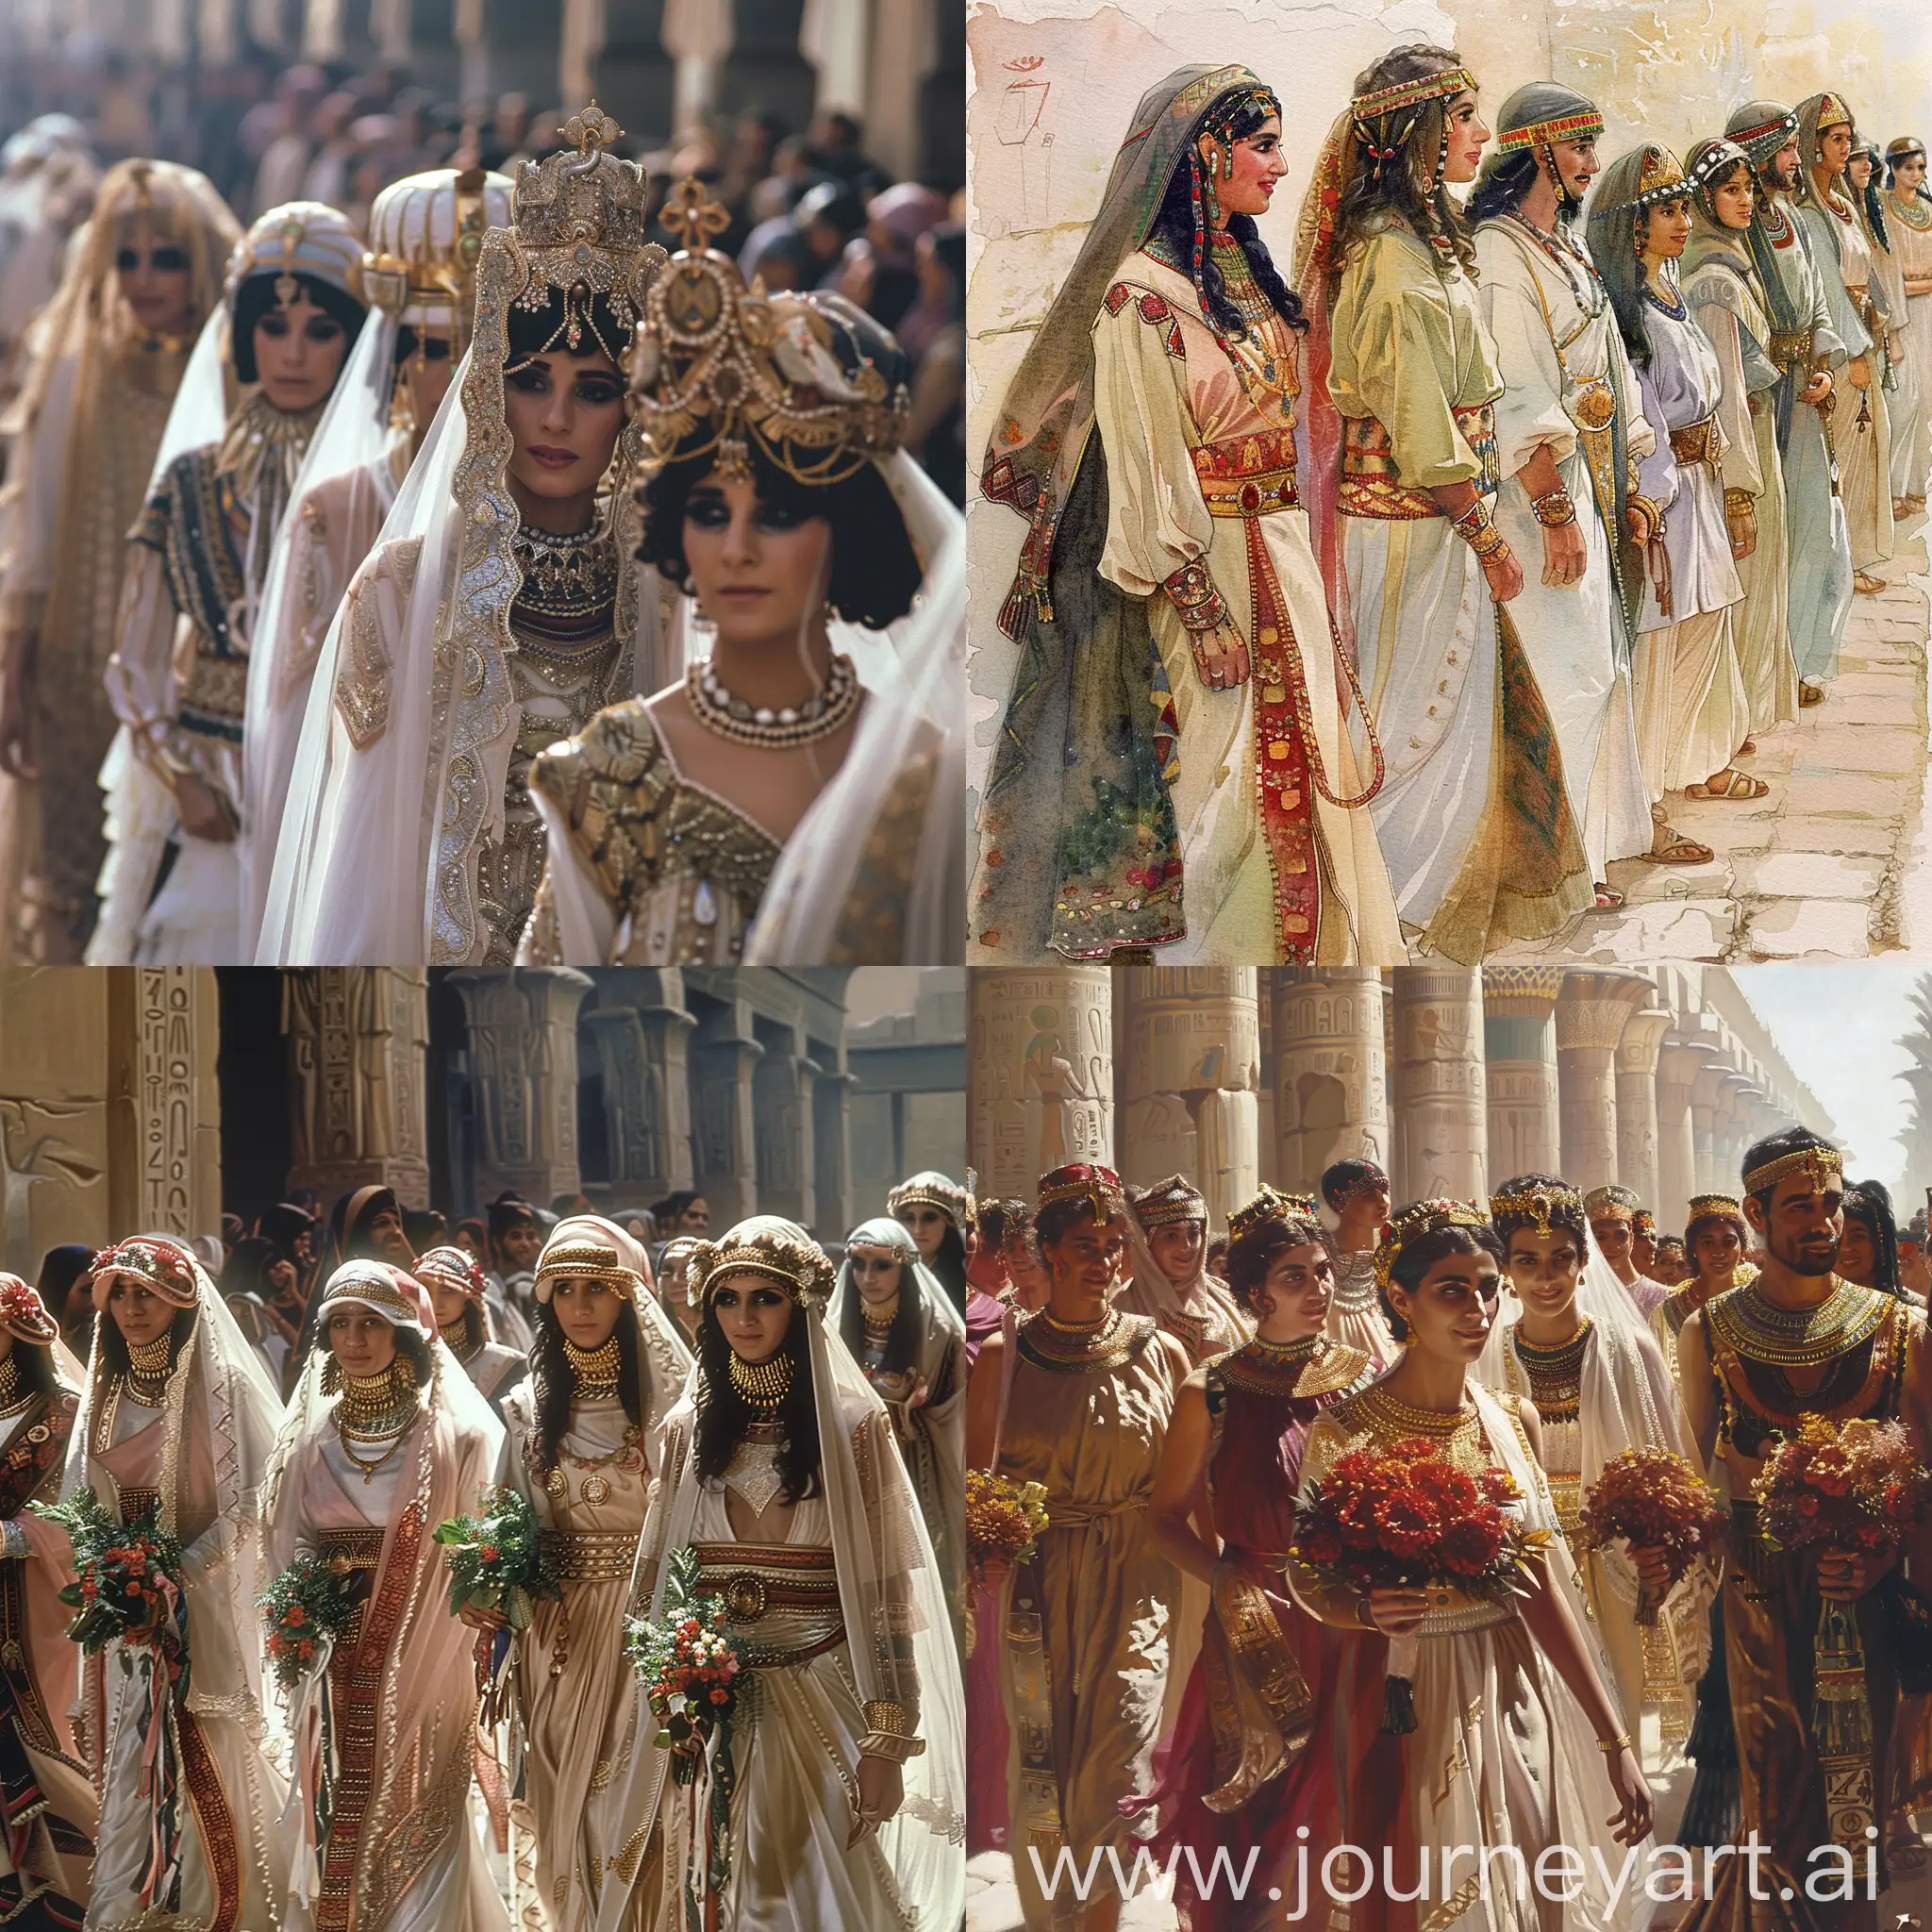  Wedding procession, showcasing traditional Egyptian wedding attire.
Text: "Rituals and Celebrations: Dressing for Special Occasions"
Description: Exploring the significance of clothing in Egyptian rituals and celebrations, with a focus on wedding attire and other cultural ceremonies.